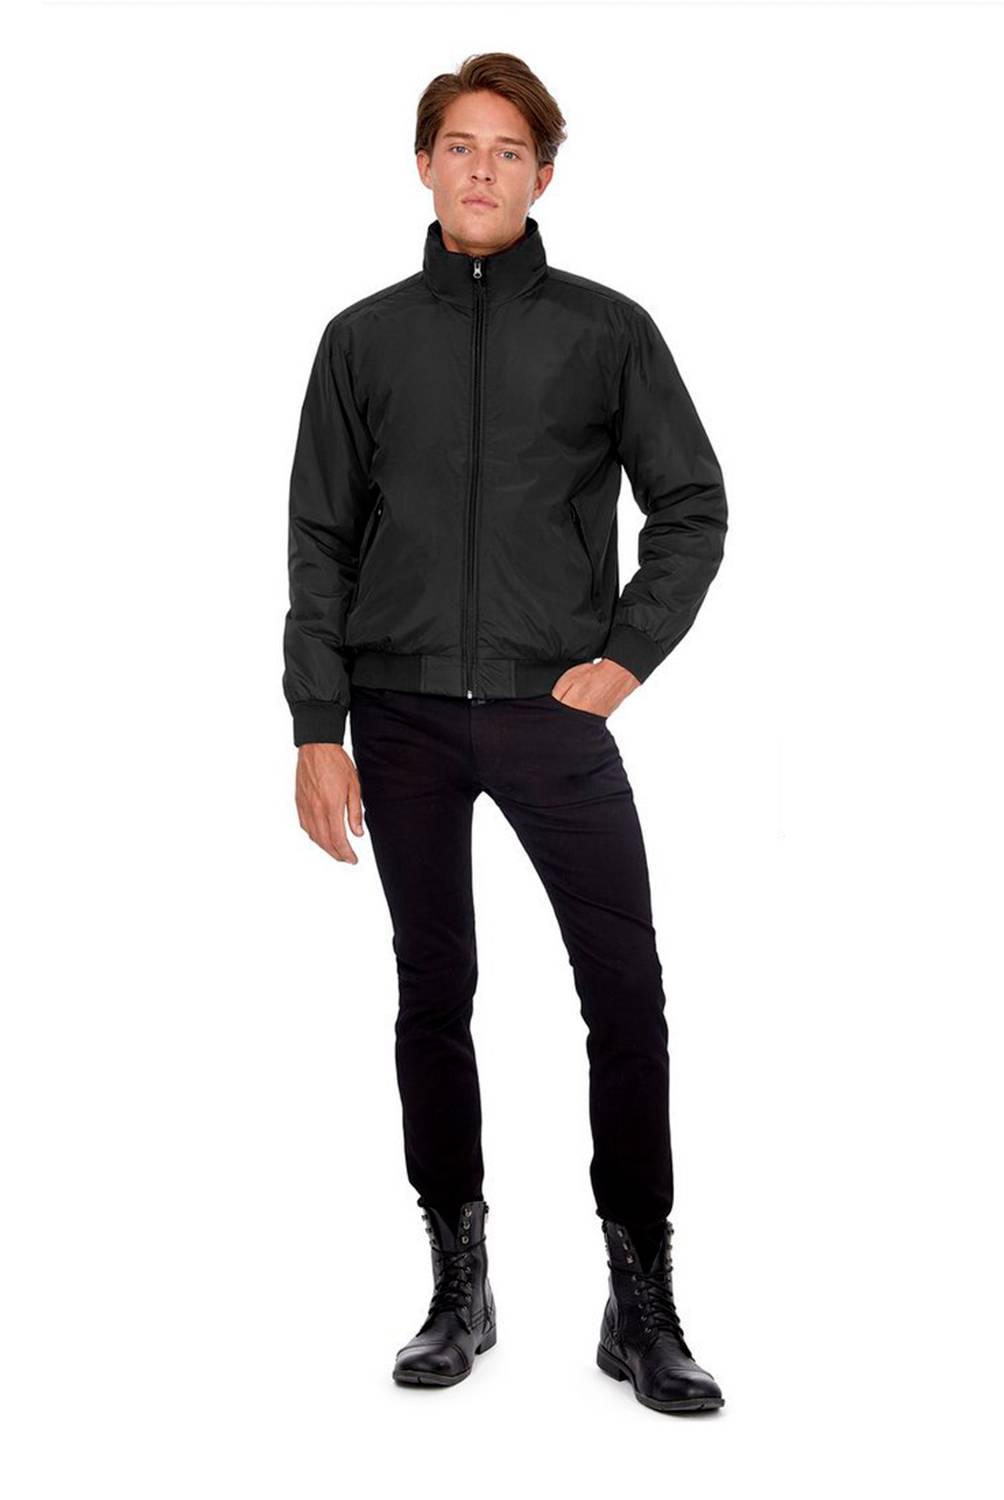 B&C COLLECTION - Chaqueta Impermeable Hombre Crew Bomber